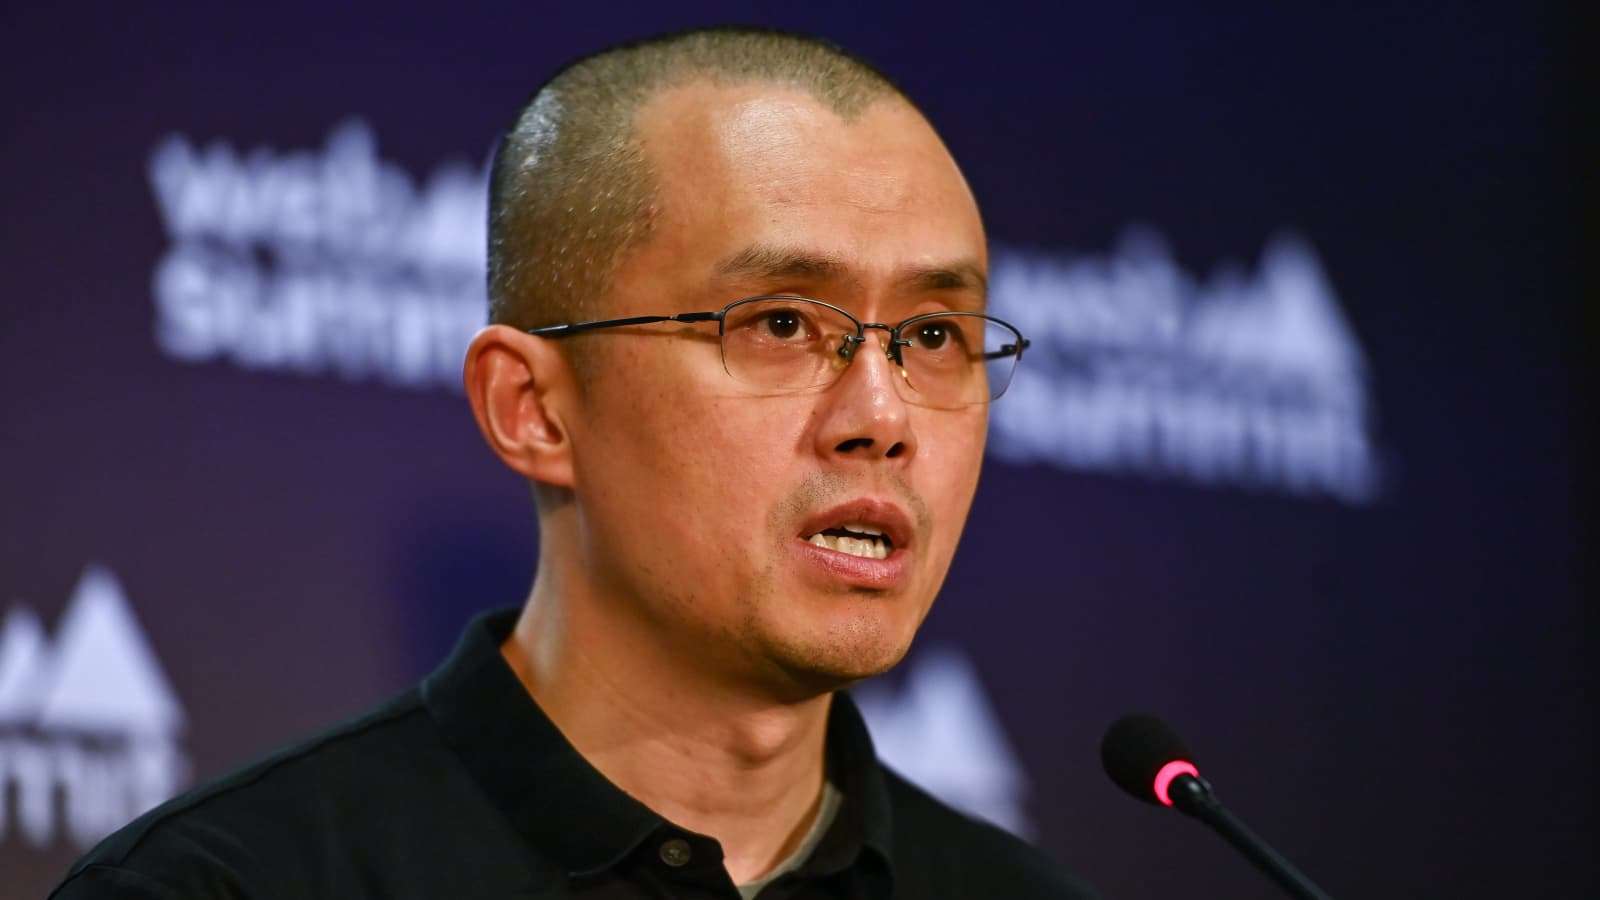 Binance Co-Founder Changpeng Zhao Launches New Project